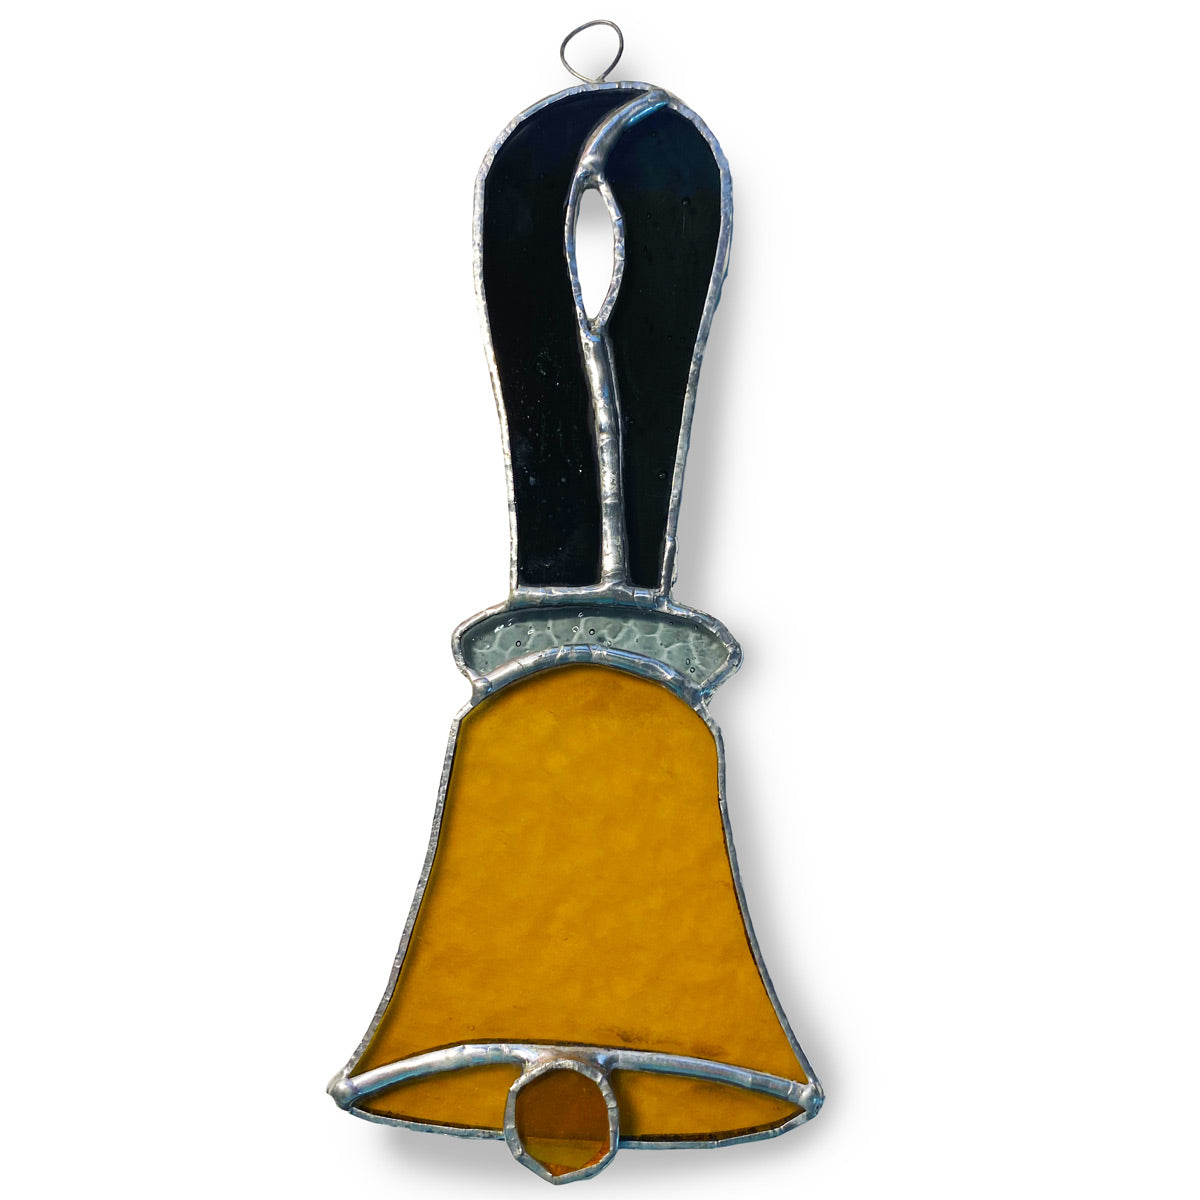 Handbell Art Glass - black and amber stained glass